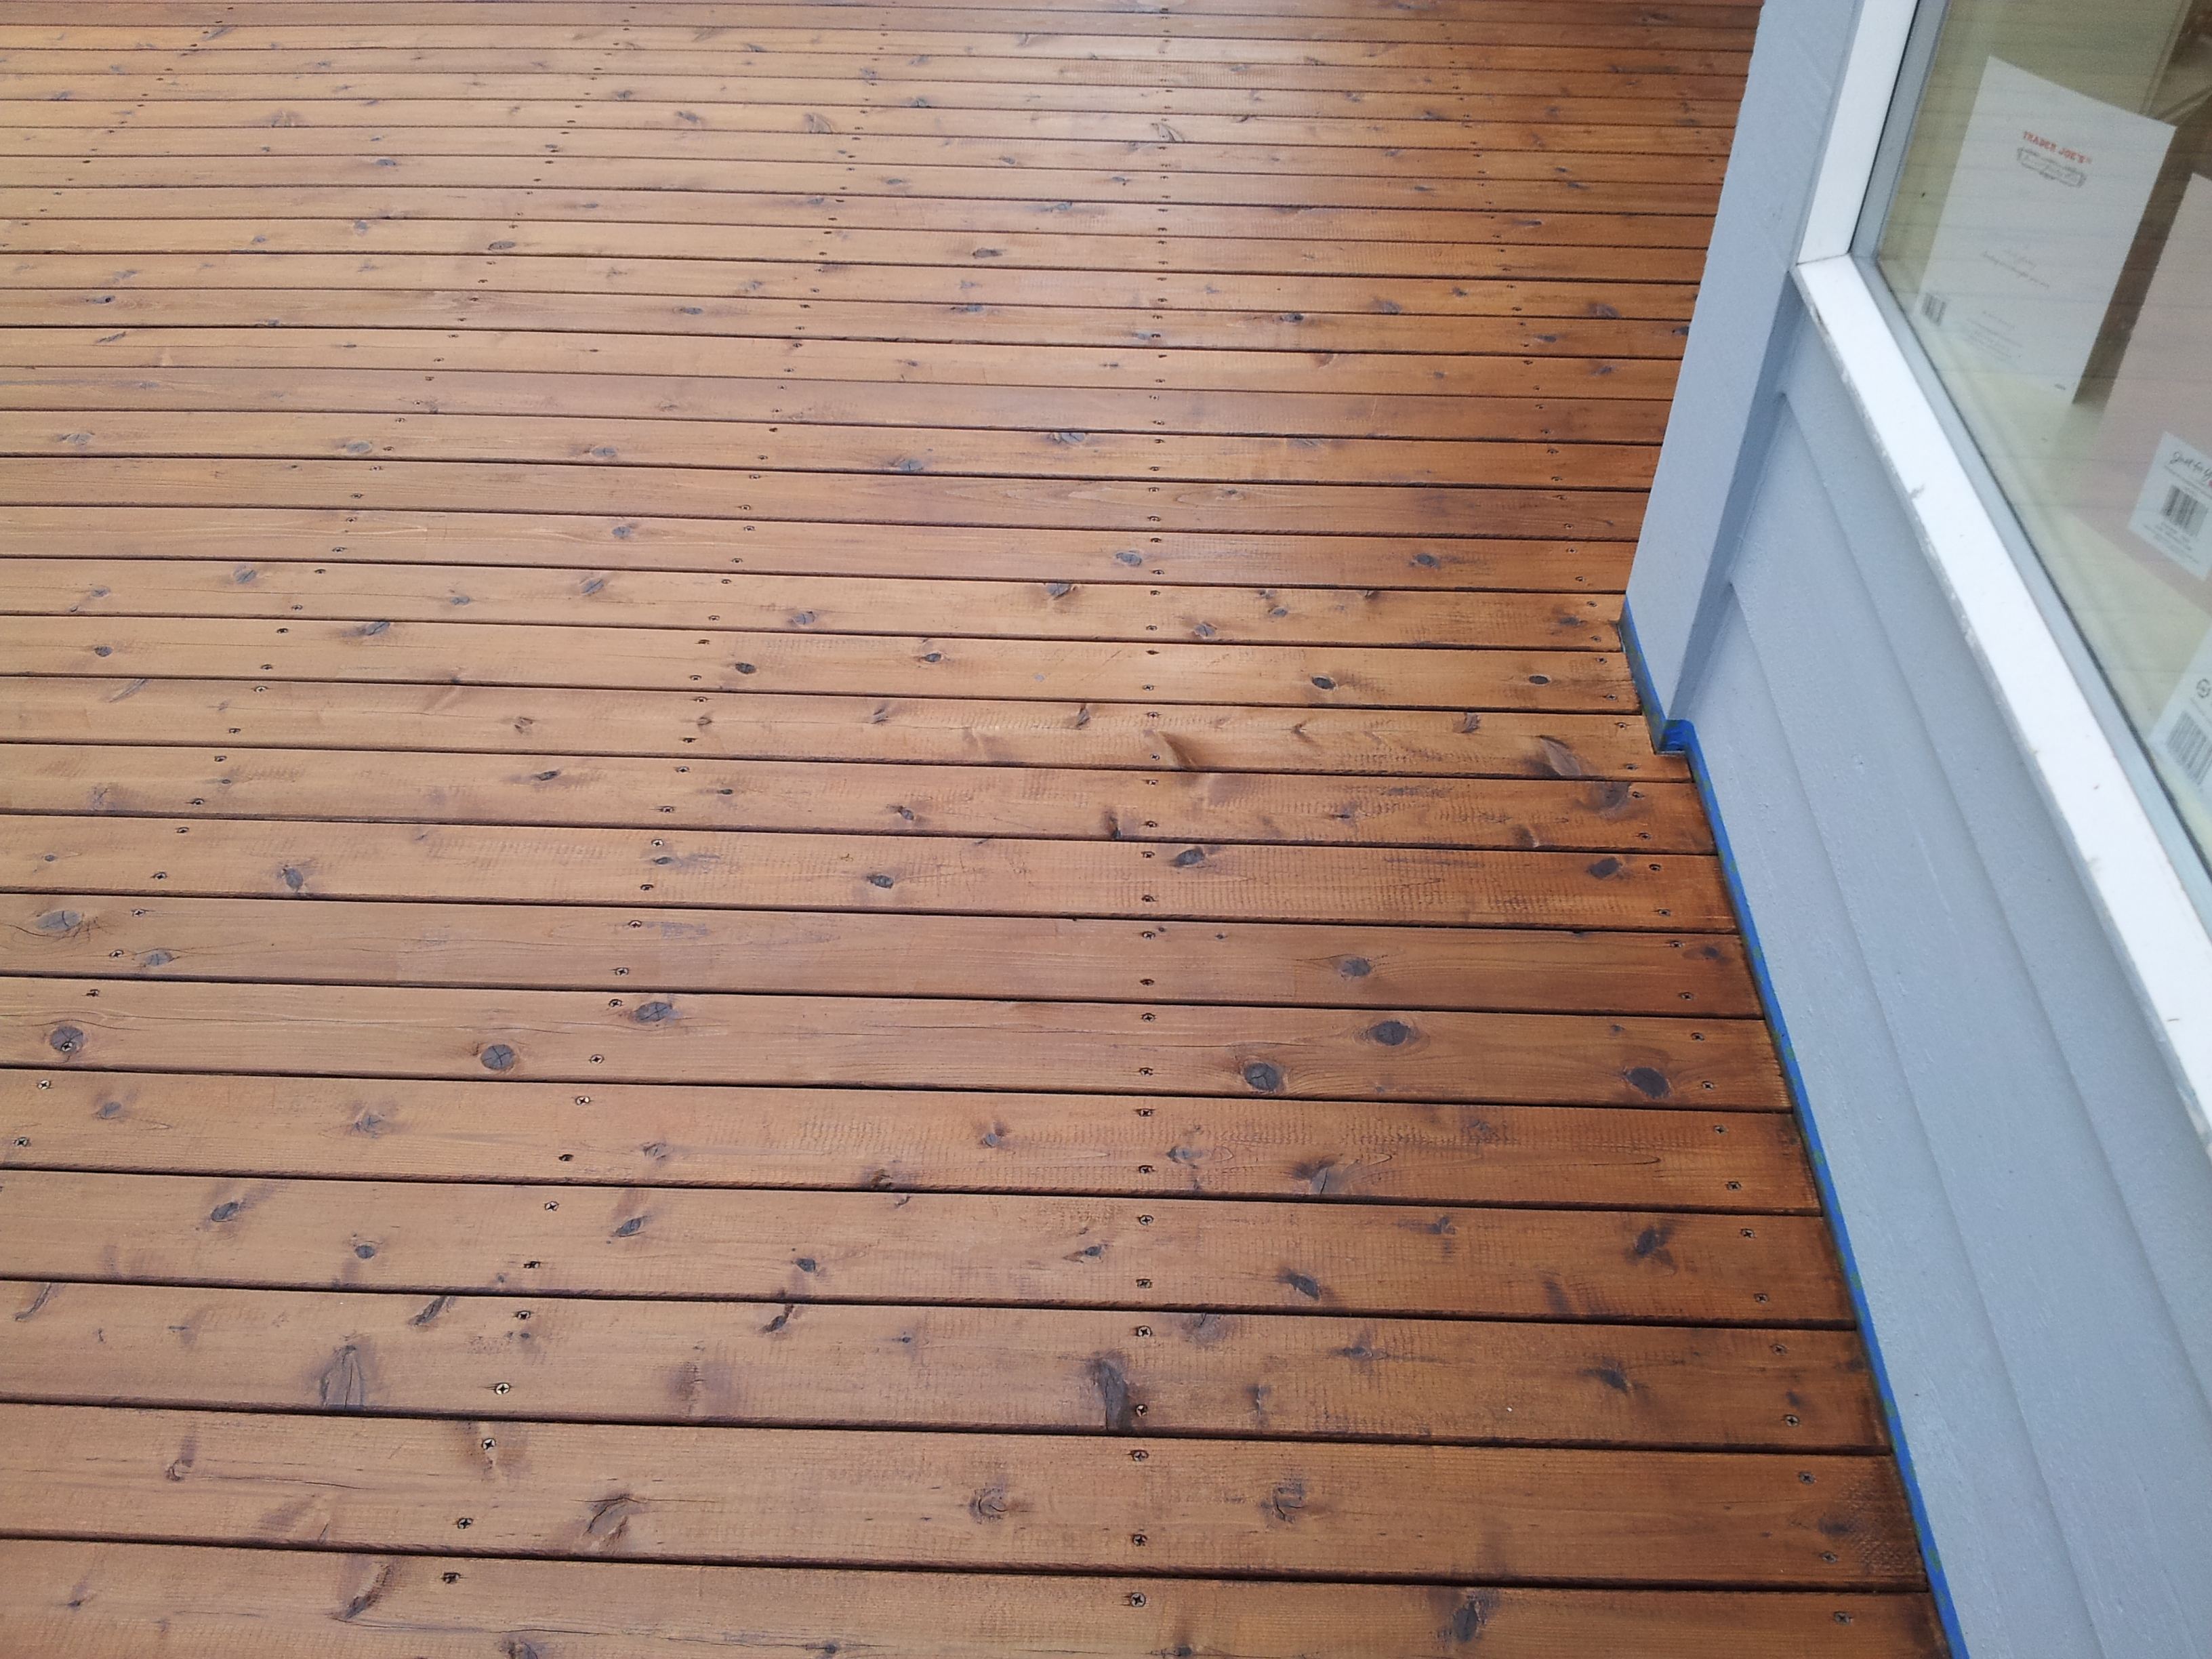 Oil Based Deck Stains 2018 Best Deck Stain Reviews Ratings for measurements 3264 X 2448